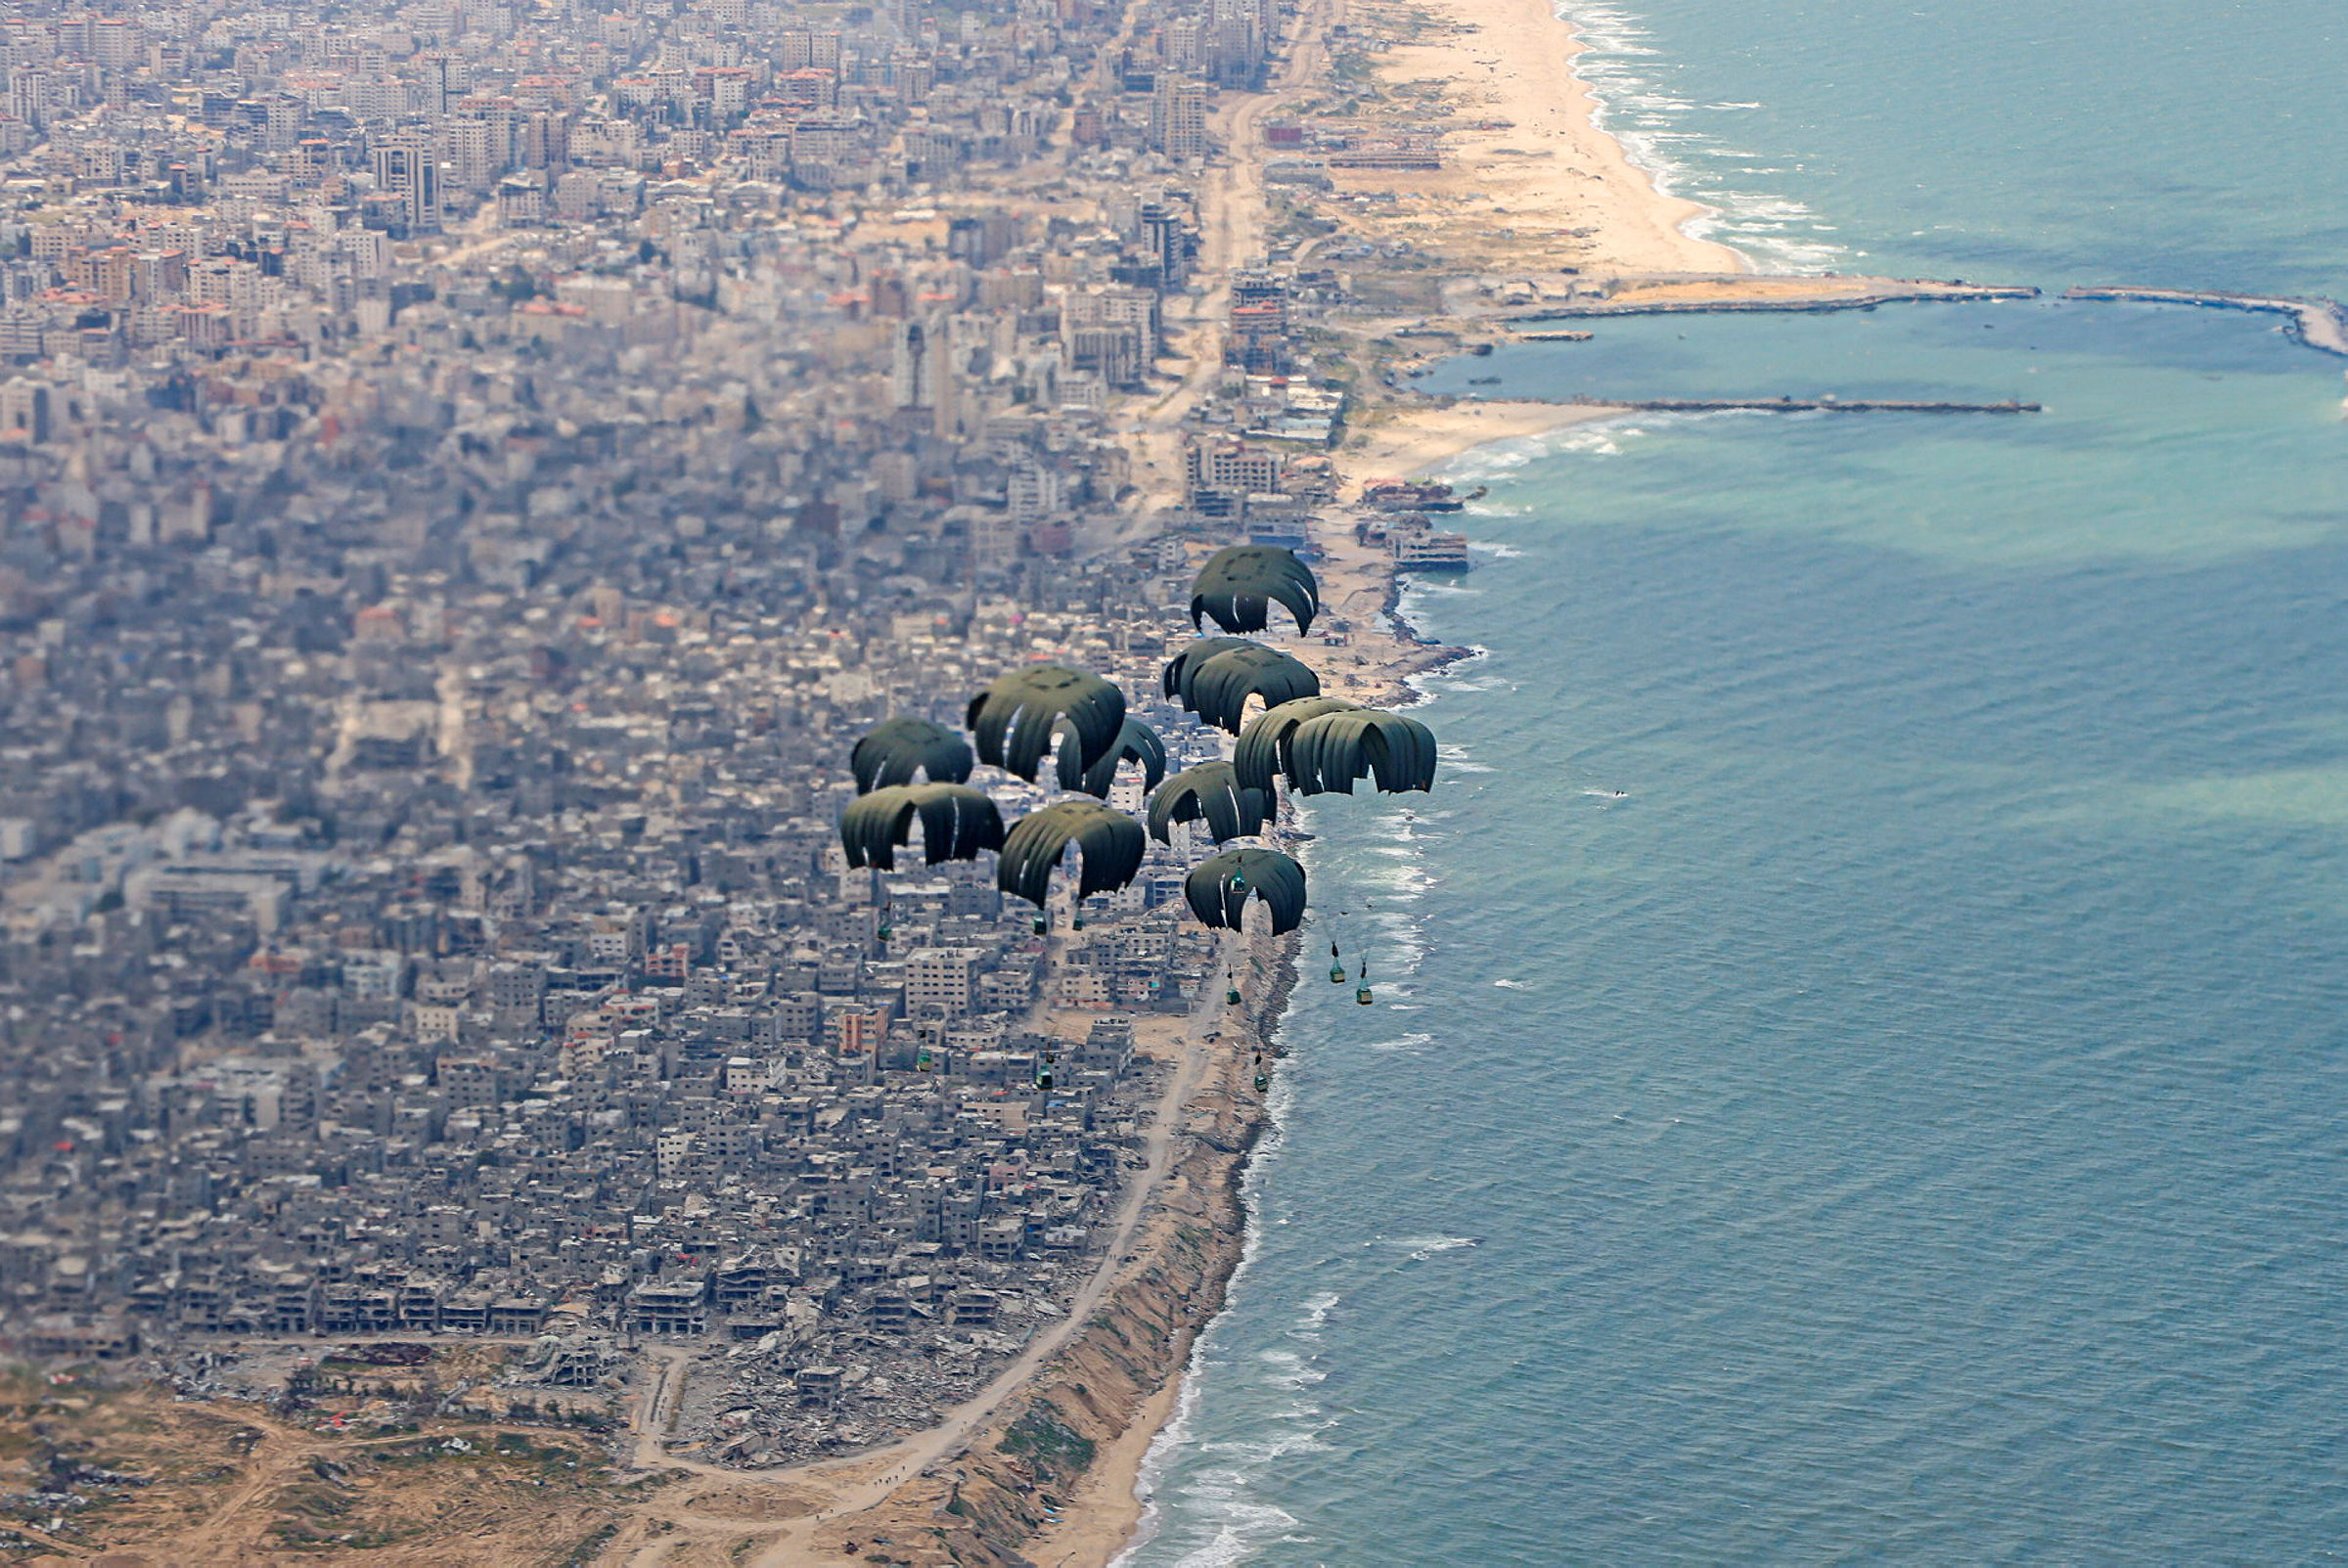 Image of humanitarian aid, seen here being airdropped over Gaza from a RAF A400M aircraft today (25/03/2024). The Royal Air Force airdropped over 10 tonnes of food supplies into Gaza for the first time on Monday, as part of international efforts to provide life-saving assistance to civilians. The aid, which consists of water, rice, cooking oil, flour, tinned goods and baby formula, will support the people of Gaza. The Defence Secretary authorised the airdrop following an assessed reduction in threat to the military mission and risk to civilians. An RAF A400M flew from Amman, Jordan to airdrop this aid along the northern coastline of Gaza, as part of the Jordanian-led international aid mission. UK personnel worked closely with the Royal Jordanian Air Force to plan and conduct this mission.